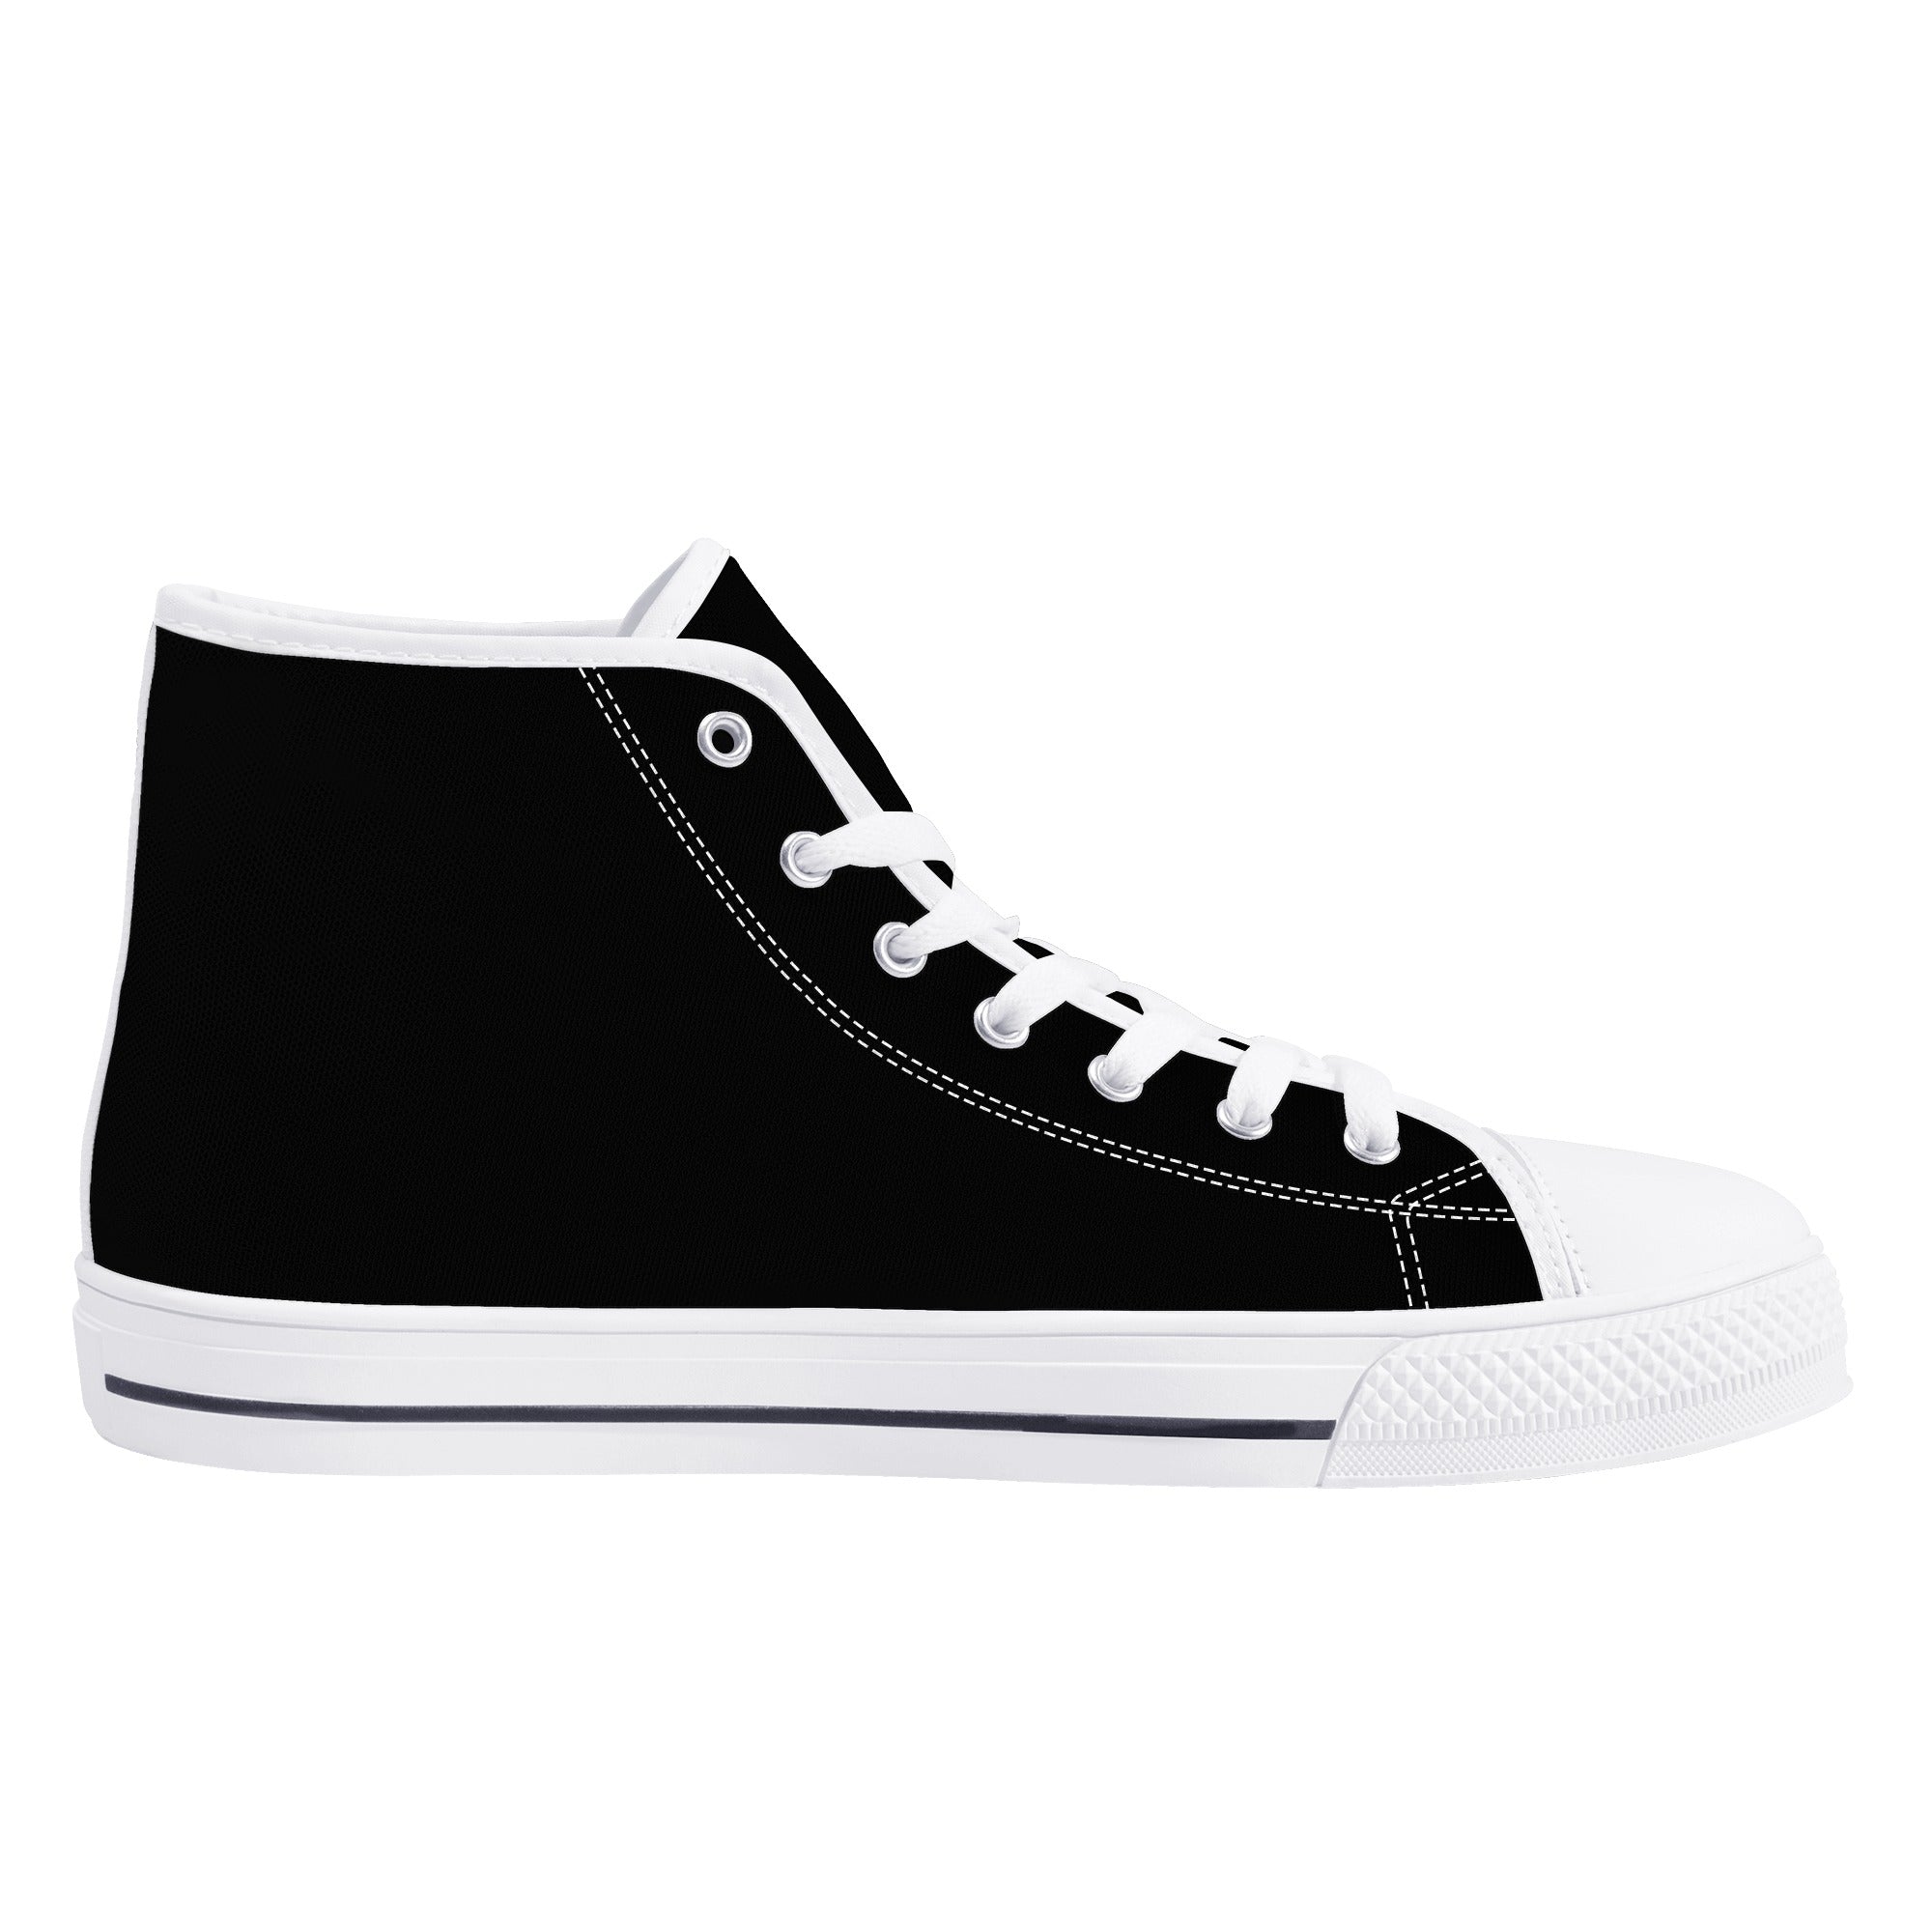 Radiant Hue Women's High Top Canvas Rave Sneakers